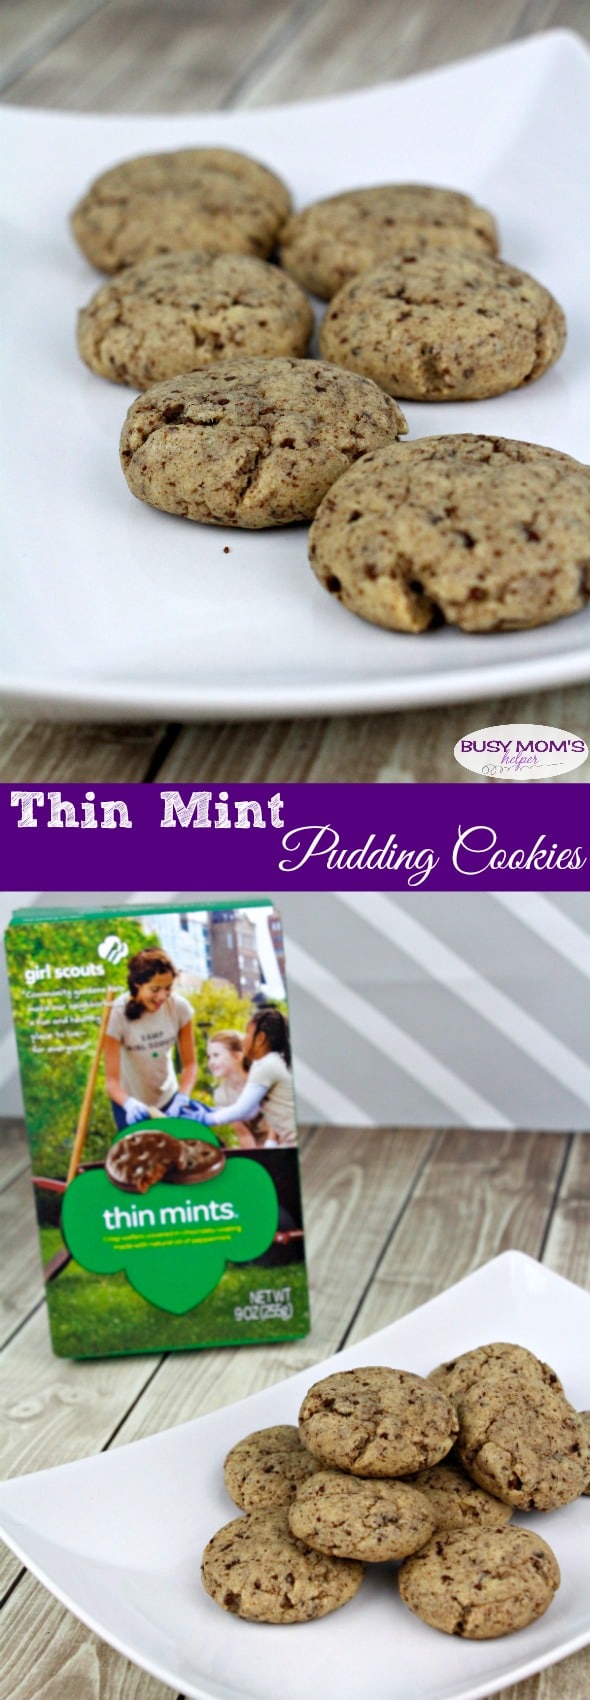 Thin Mint Pudding Cookies #AD #thinmint #cookies #puddingcookies #dessert #snack #girlscouts #cookierecipe #recipe #food